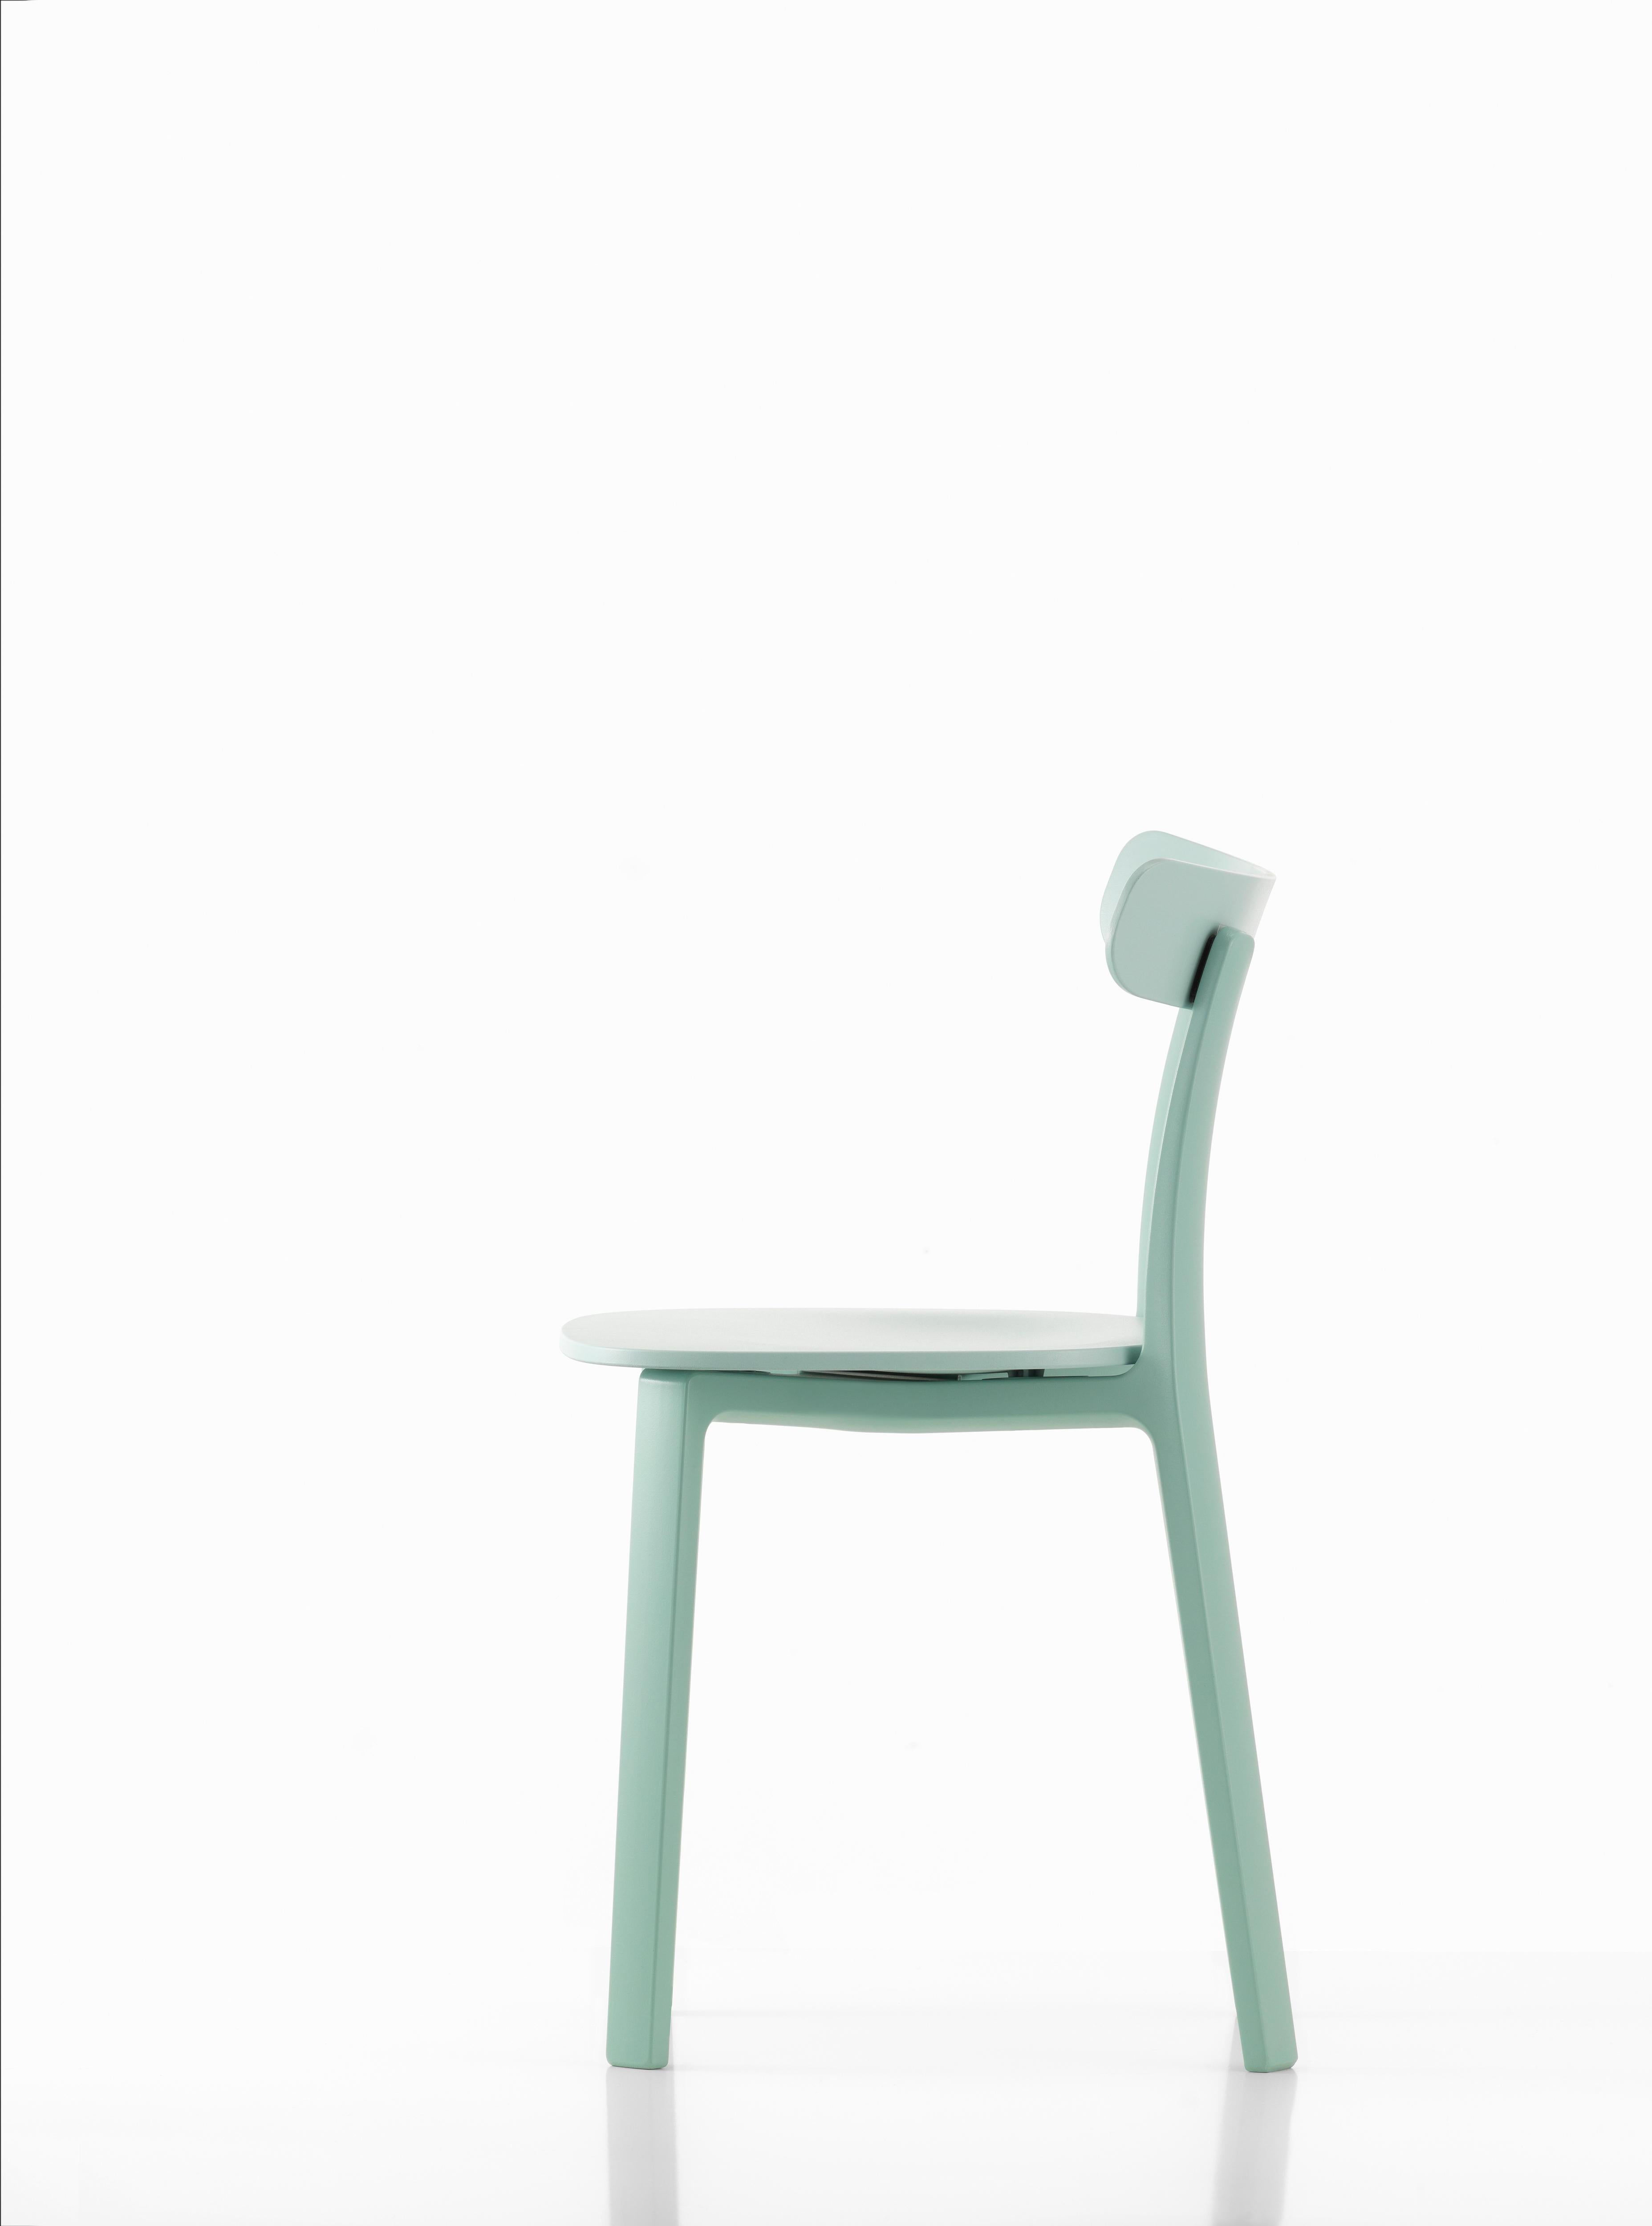 These products are only available in the United States.

 At first glance, the All Plastic Chair is reminiscent of the simple, Classic wooden chairs that have been familiar in Europe for many decades. Utilizing a new material, the chair represents a